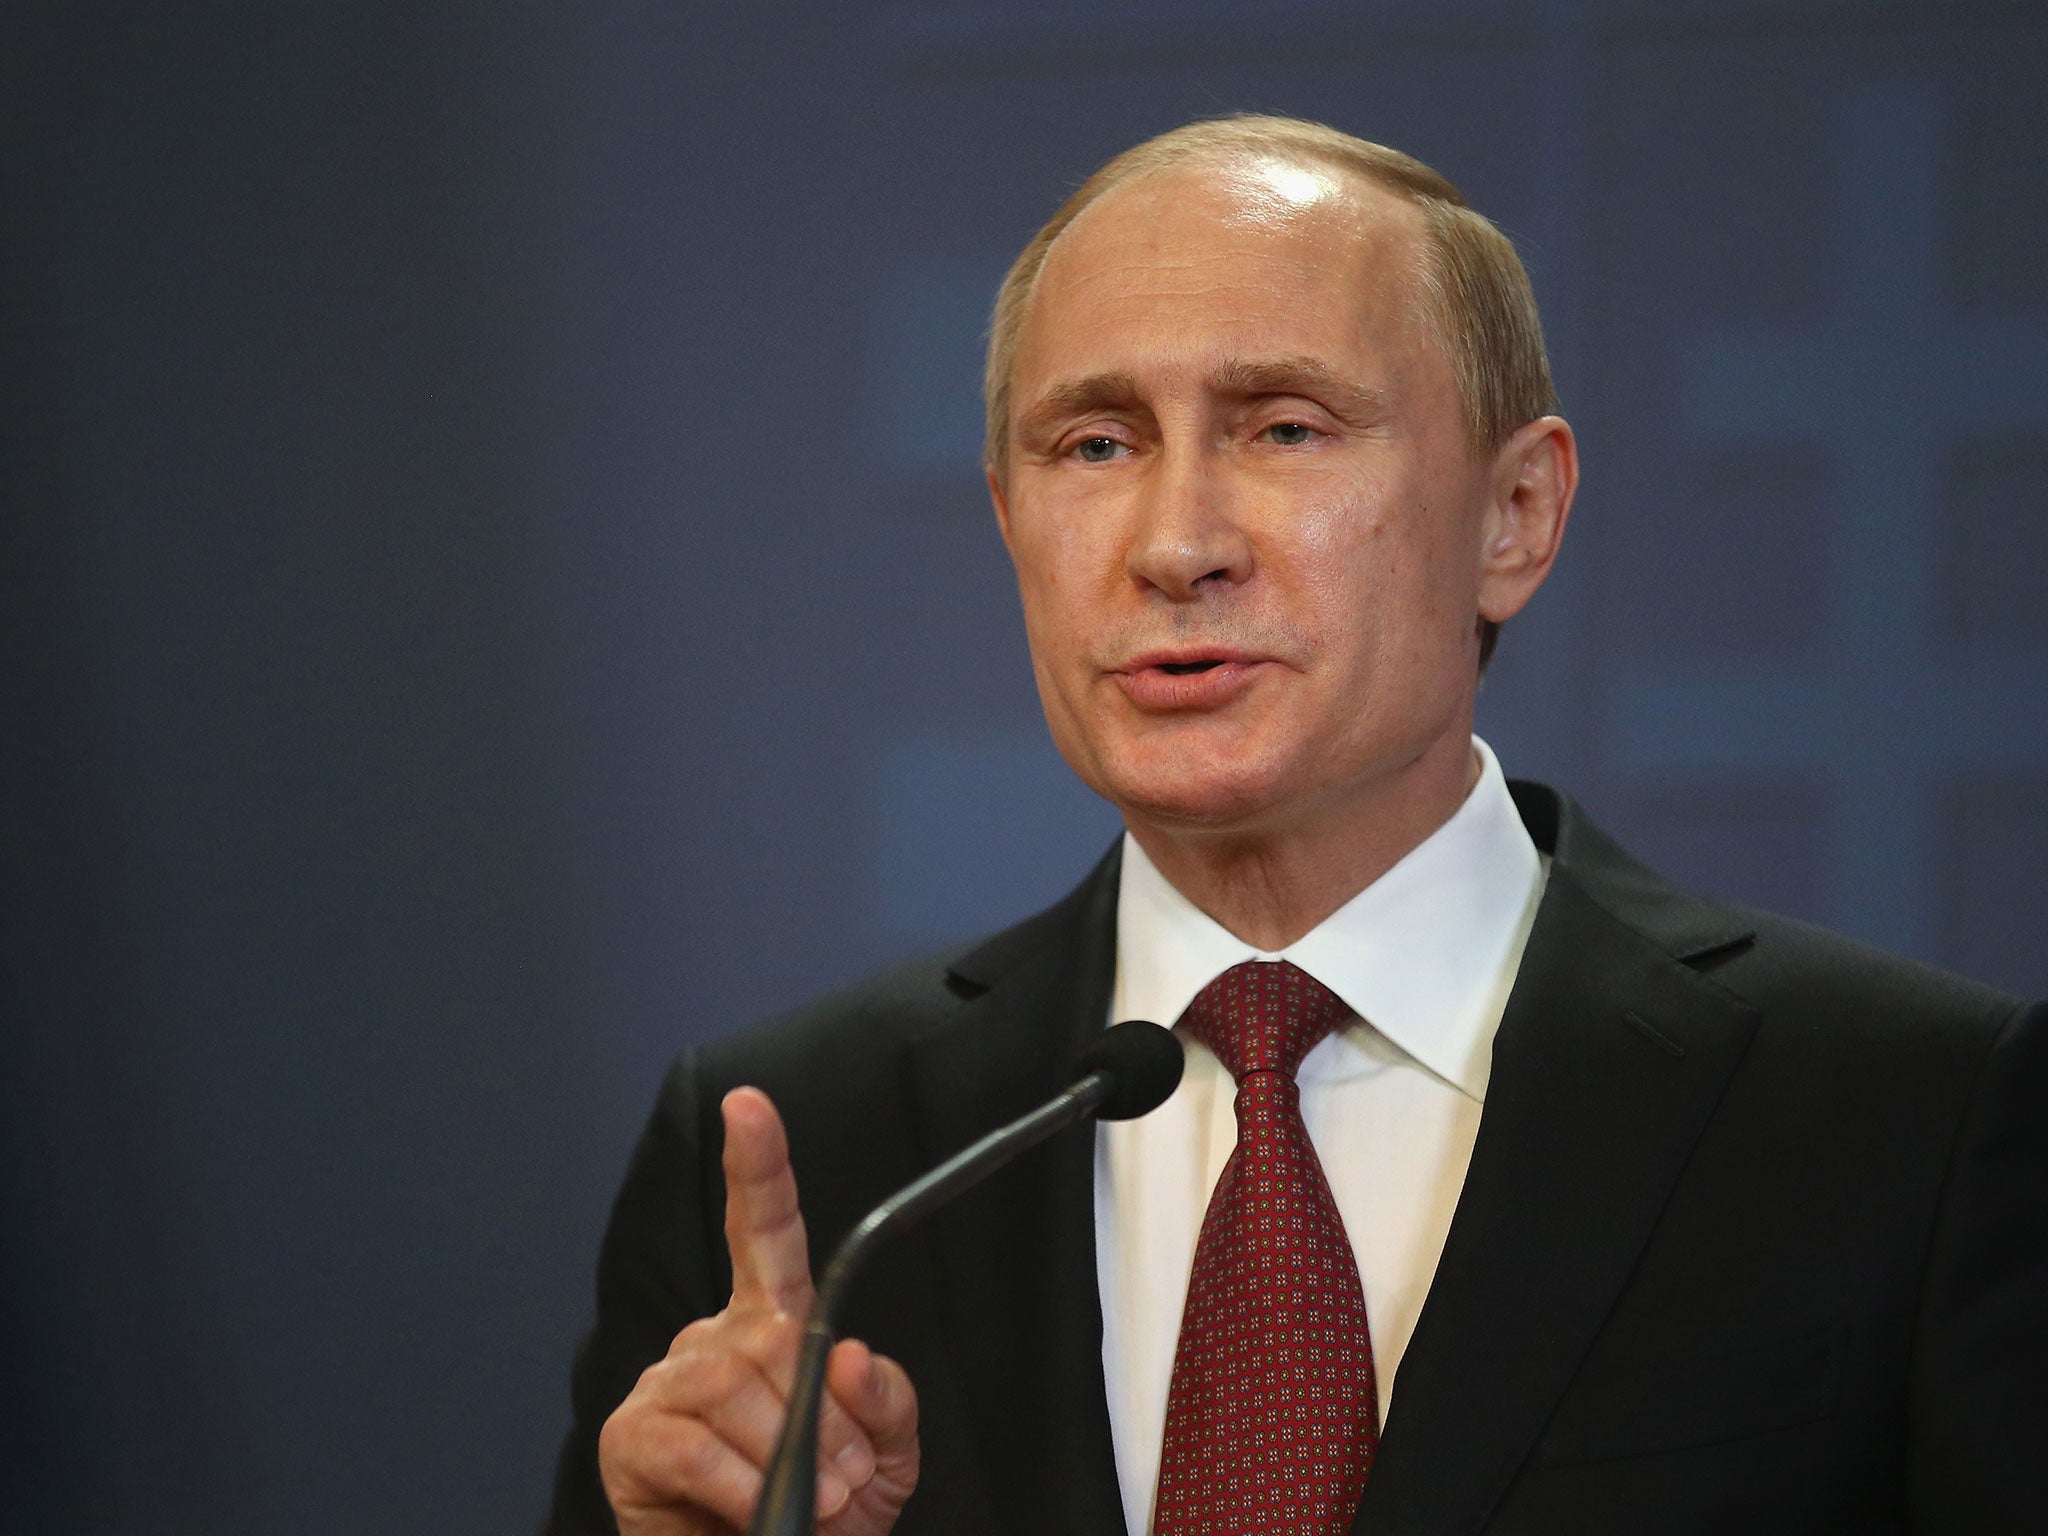 Mr Putin says the currency would help member states' economies